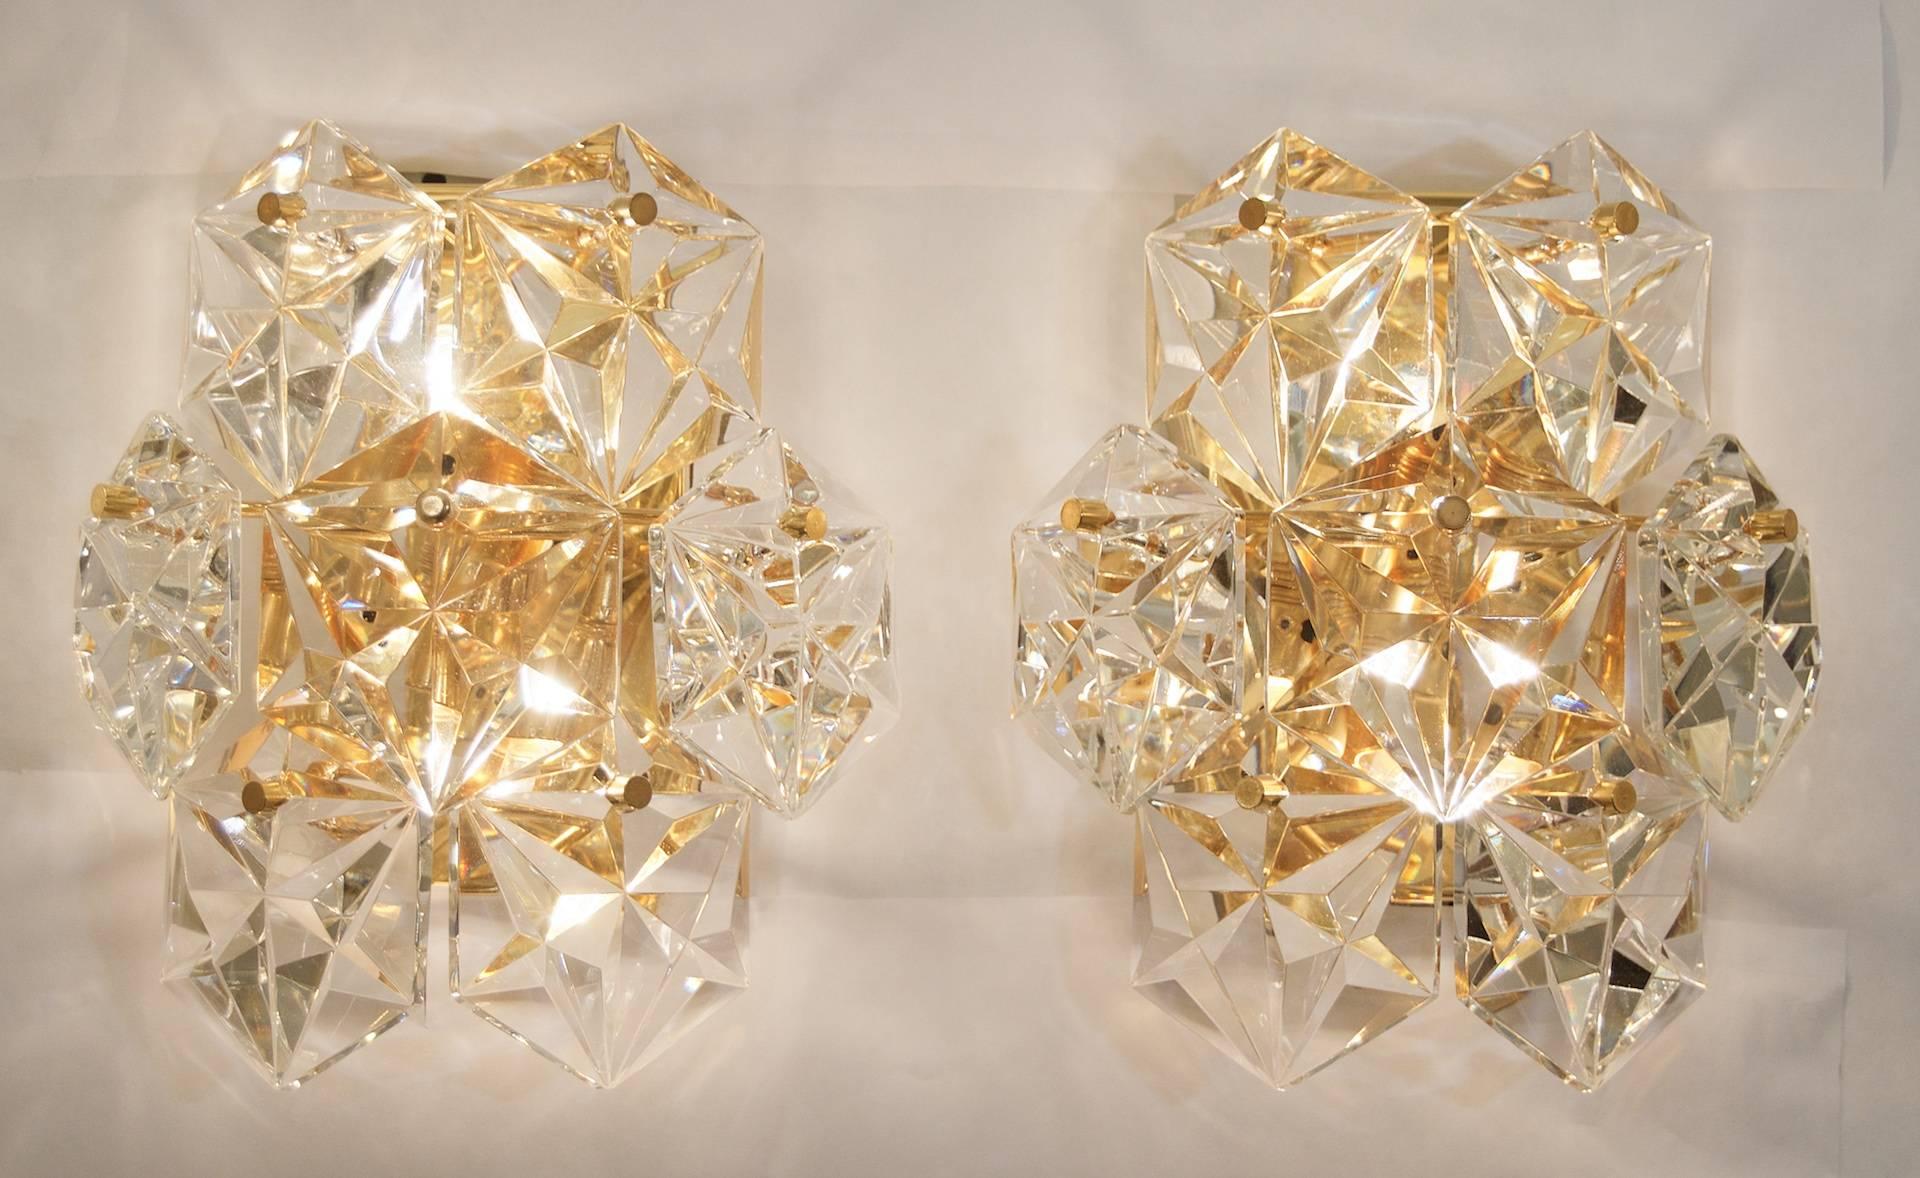 A spectacular pair of Kinkeldey wall sconces with seven crystals each, throwing an excellent, lustrous, fire. Back plates are gold-plated.

Each takes two E-14 bulbs up to 40W per socket. Completely rewired.

Please note price listed is per pair